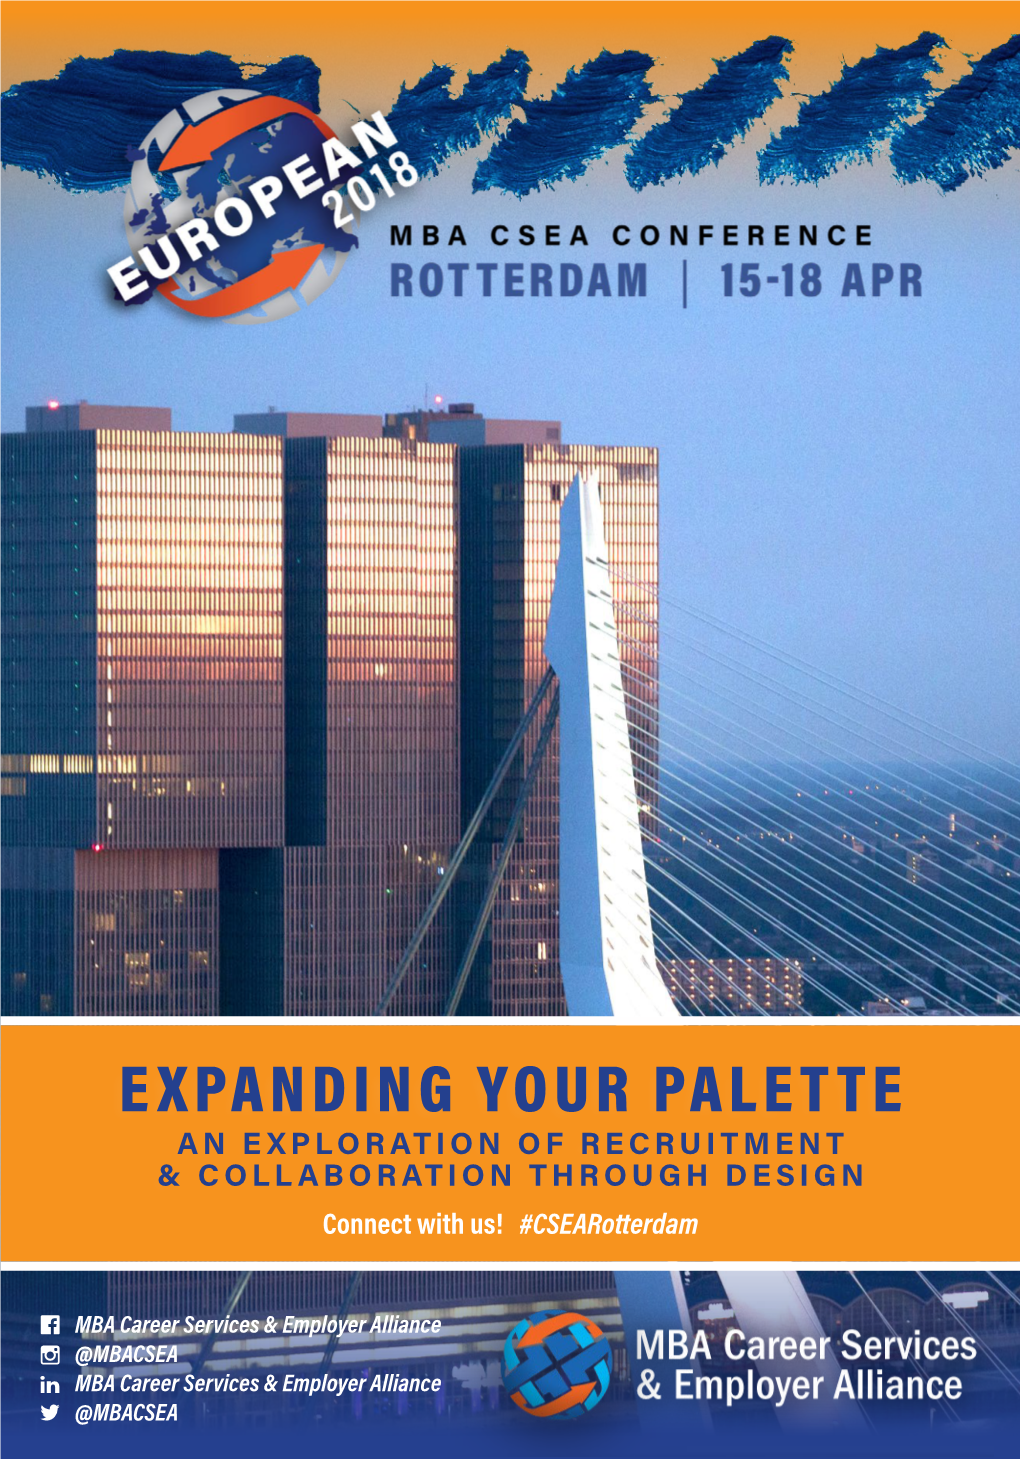 EXPANDING YOUR PALETTE an EXPLORATION of RECRUITMENT & COLLABORATION THROUGH DESIGN Connect with Us! #Csearotterdam